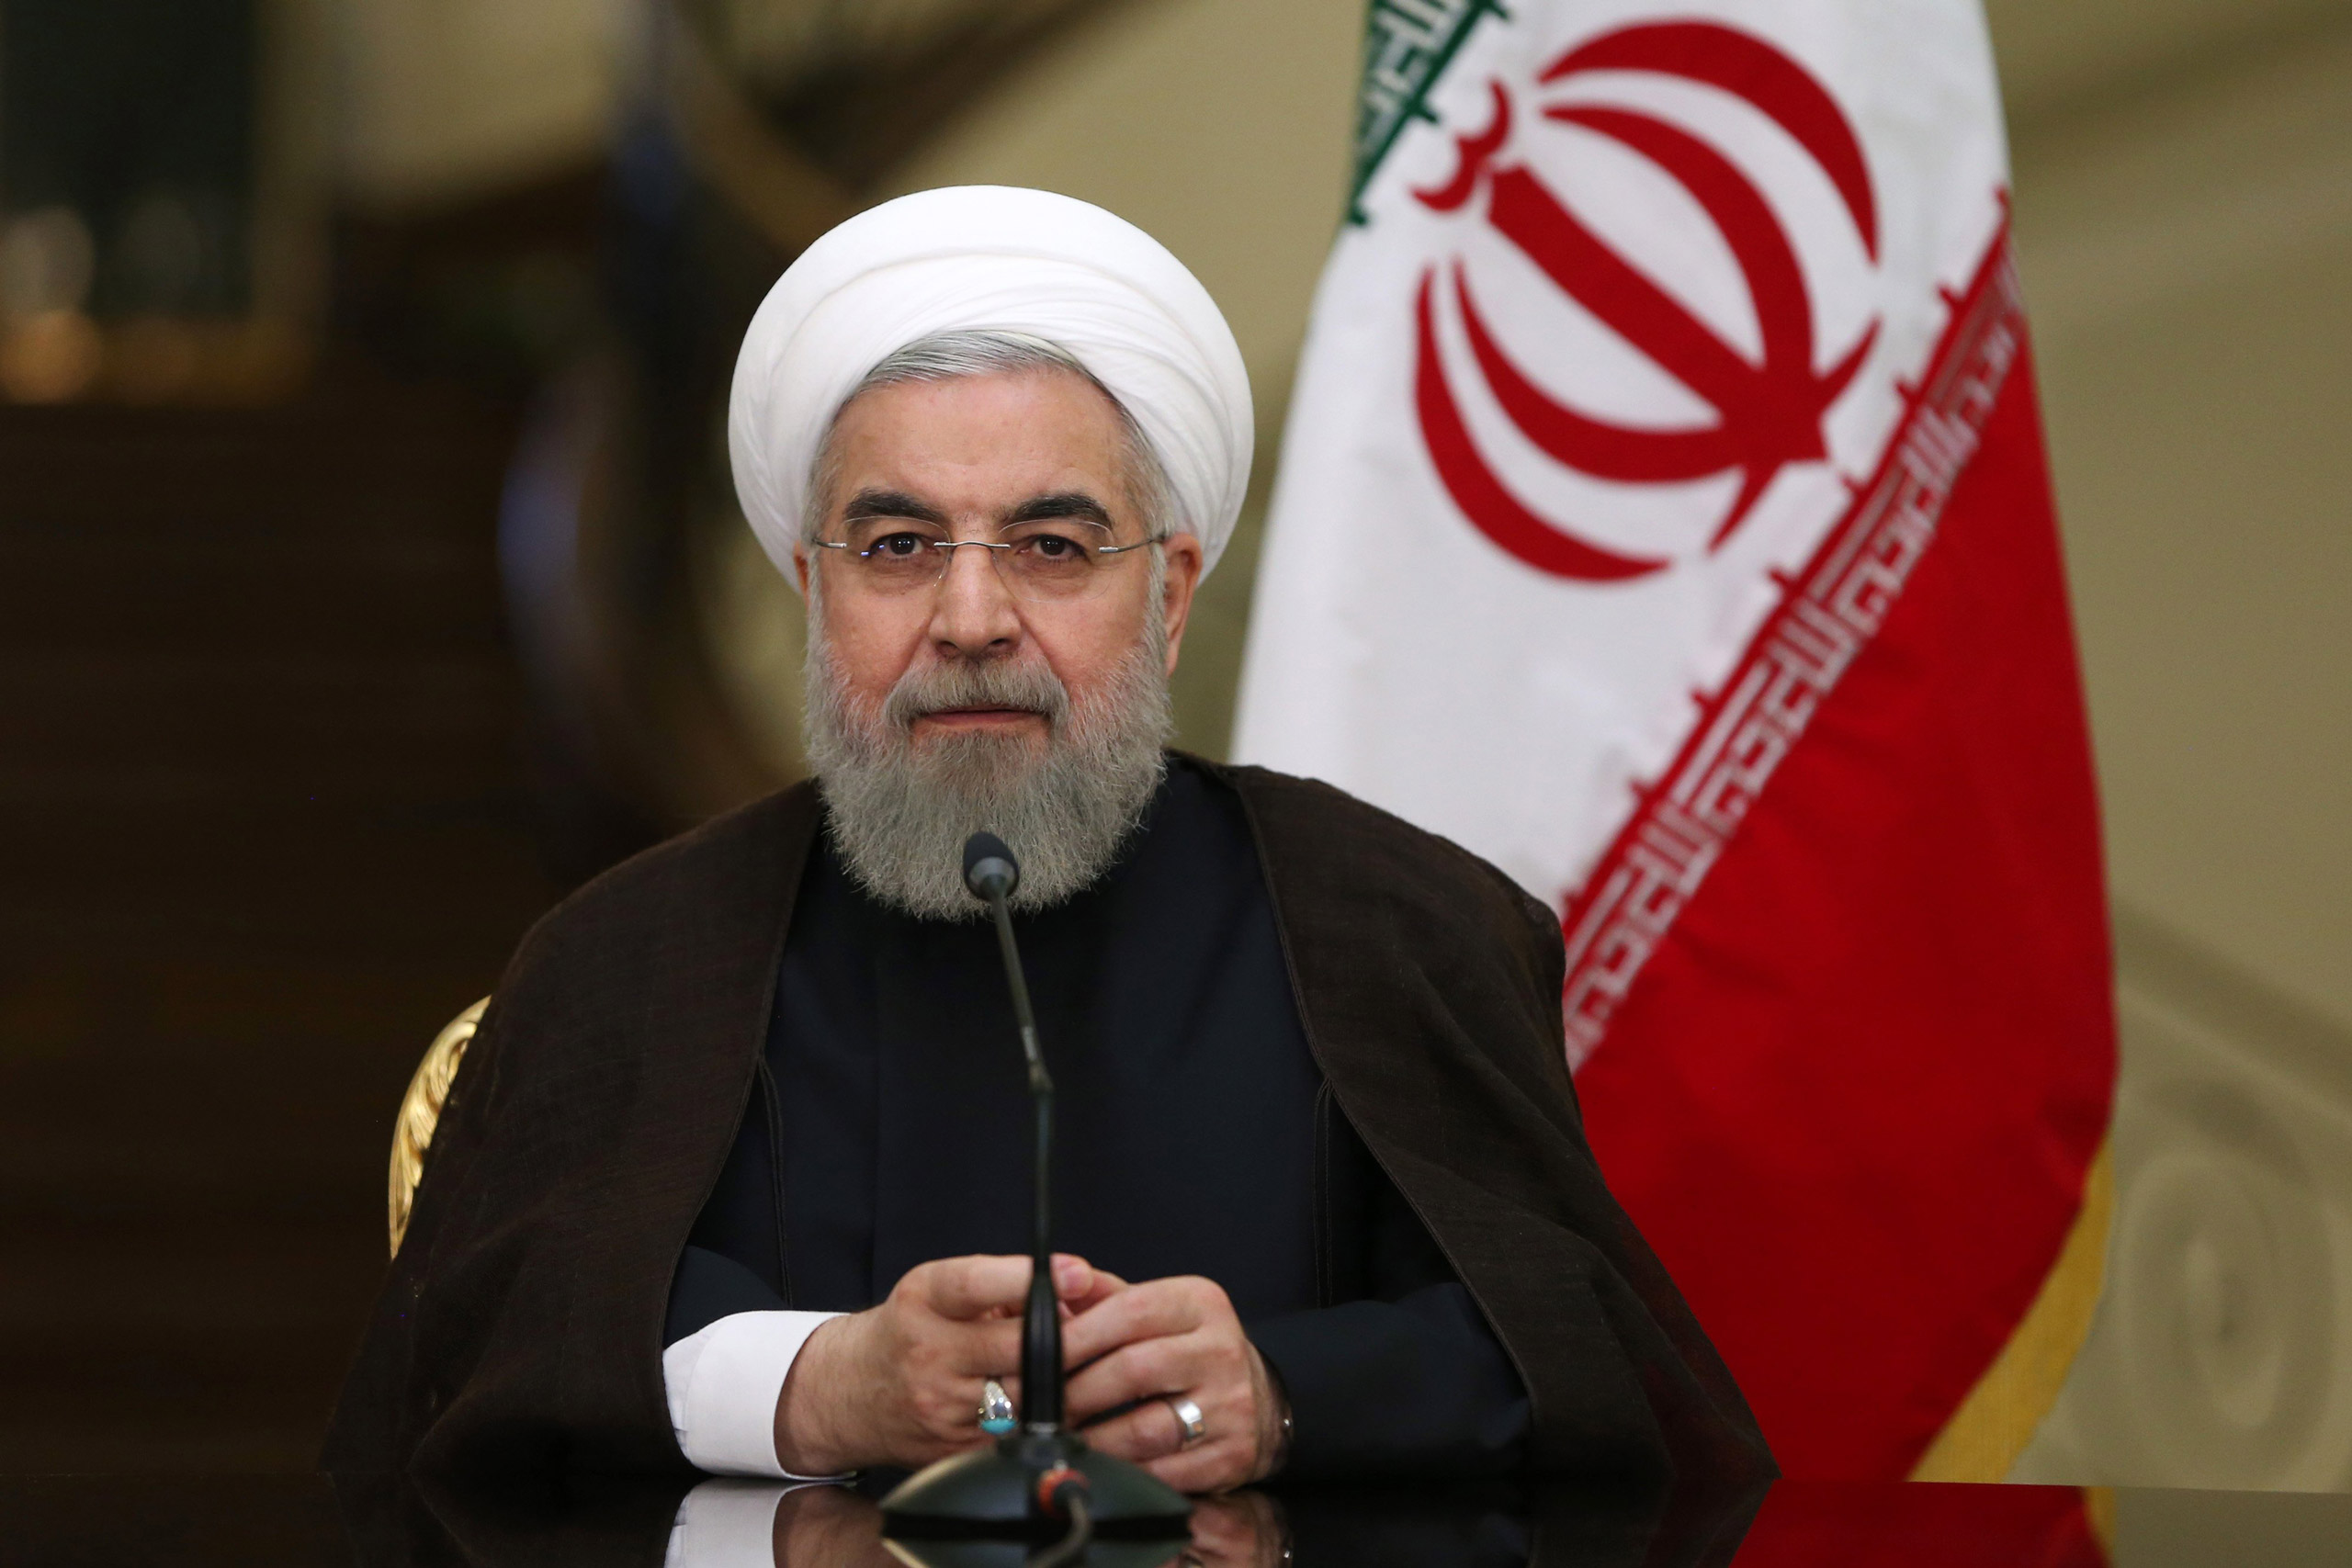 Iran to comply with nuclear deal if U.S. lifts sanctions – Rouhani